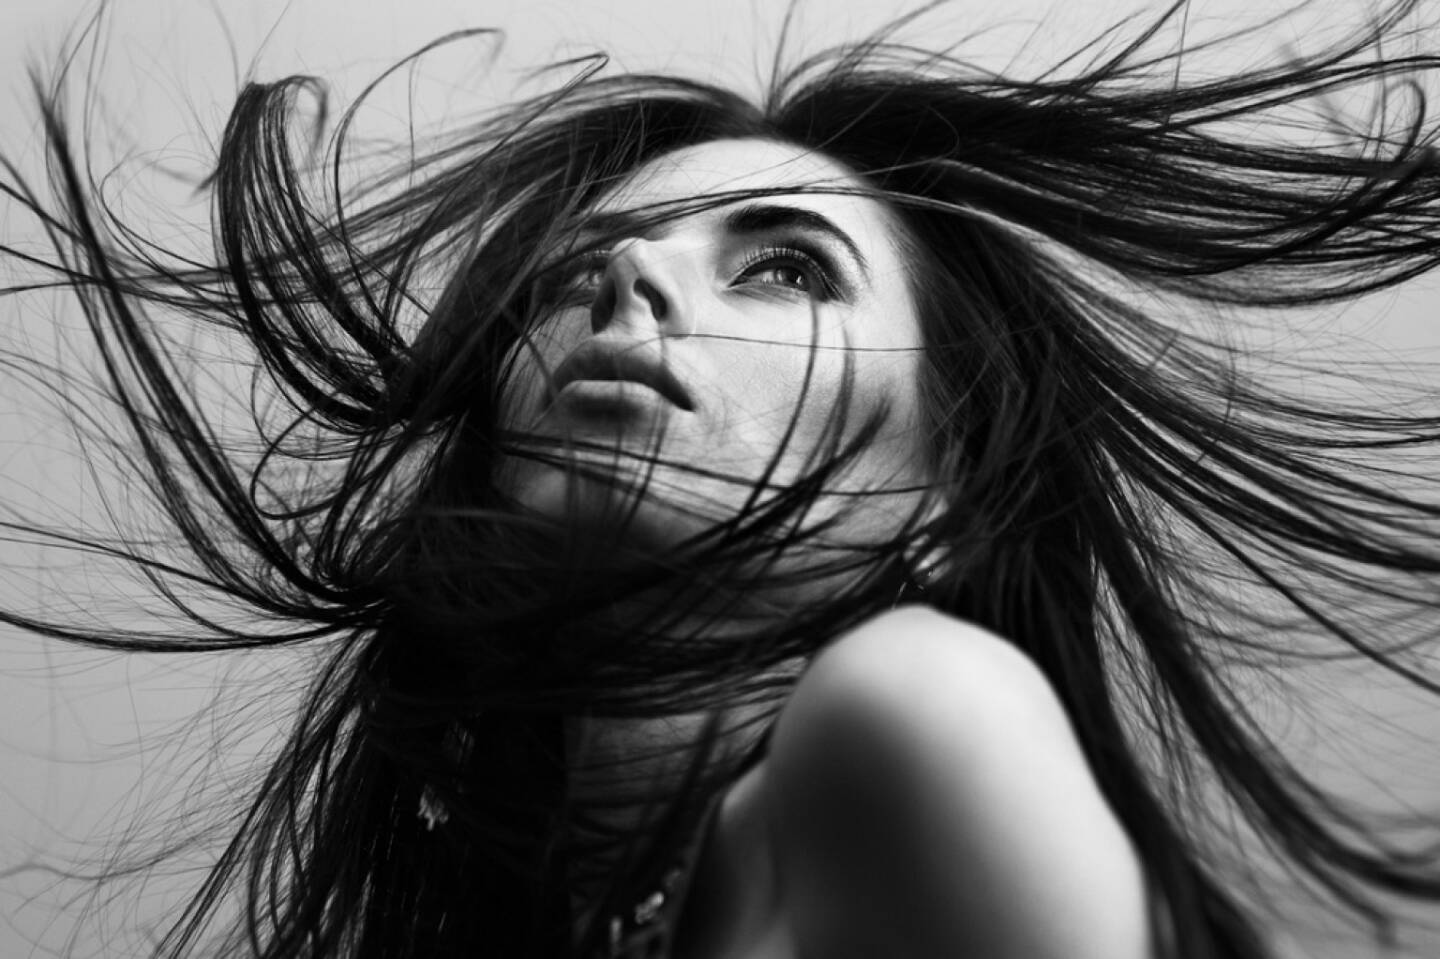 stürmisch, Sturm, turbulent, Chaos, http://www.shutterstock.com/de/pic-149736302/stock-photo-portrait-of-a-beautiful-fashionable-young-girl-with-flying-hair.html 